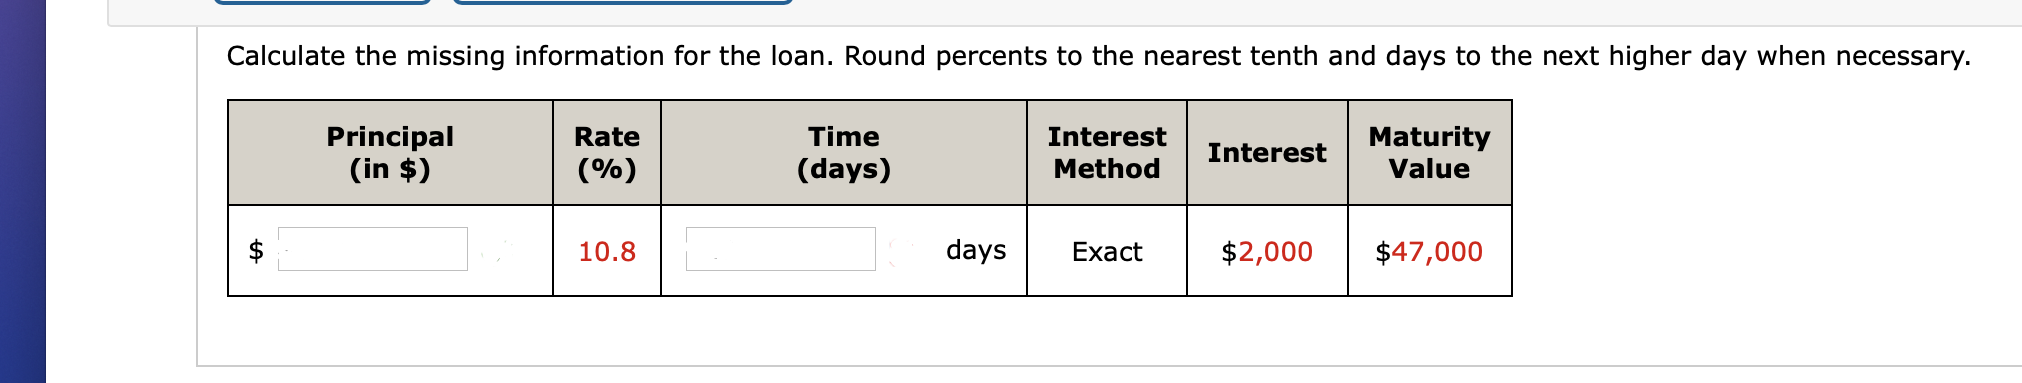 Calculate the missing information for the loan. Round percents to the nearest tenth and days to the next higher day when necessary.
Principal
(in $)
Time
Maturity
Value
Rate
Interest
Interest
(%)
(days)
Method
10.8
days
Exact
$2,000
$47,000
